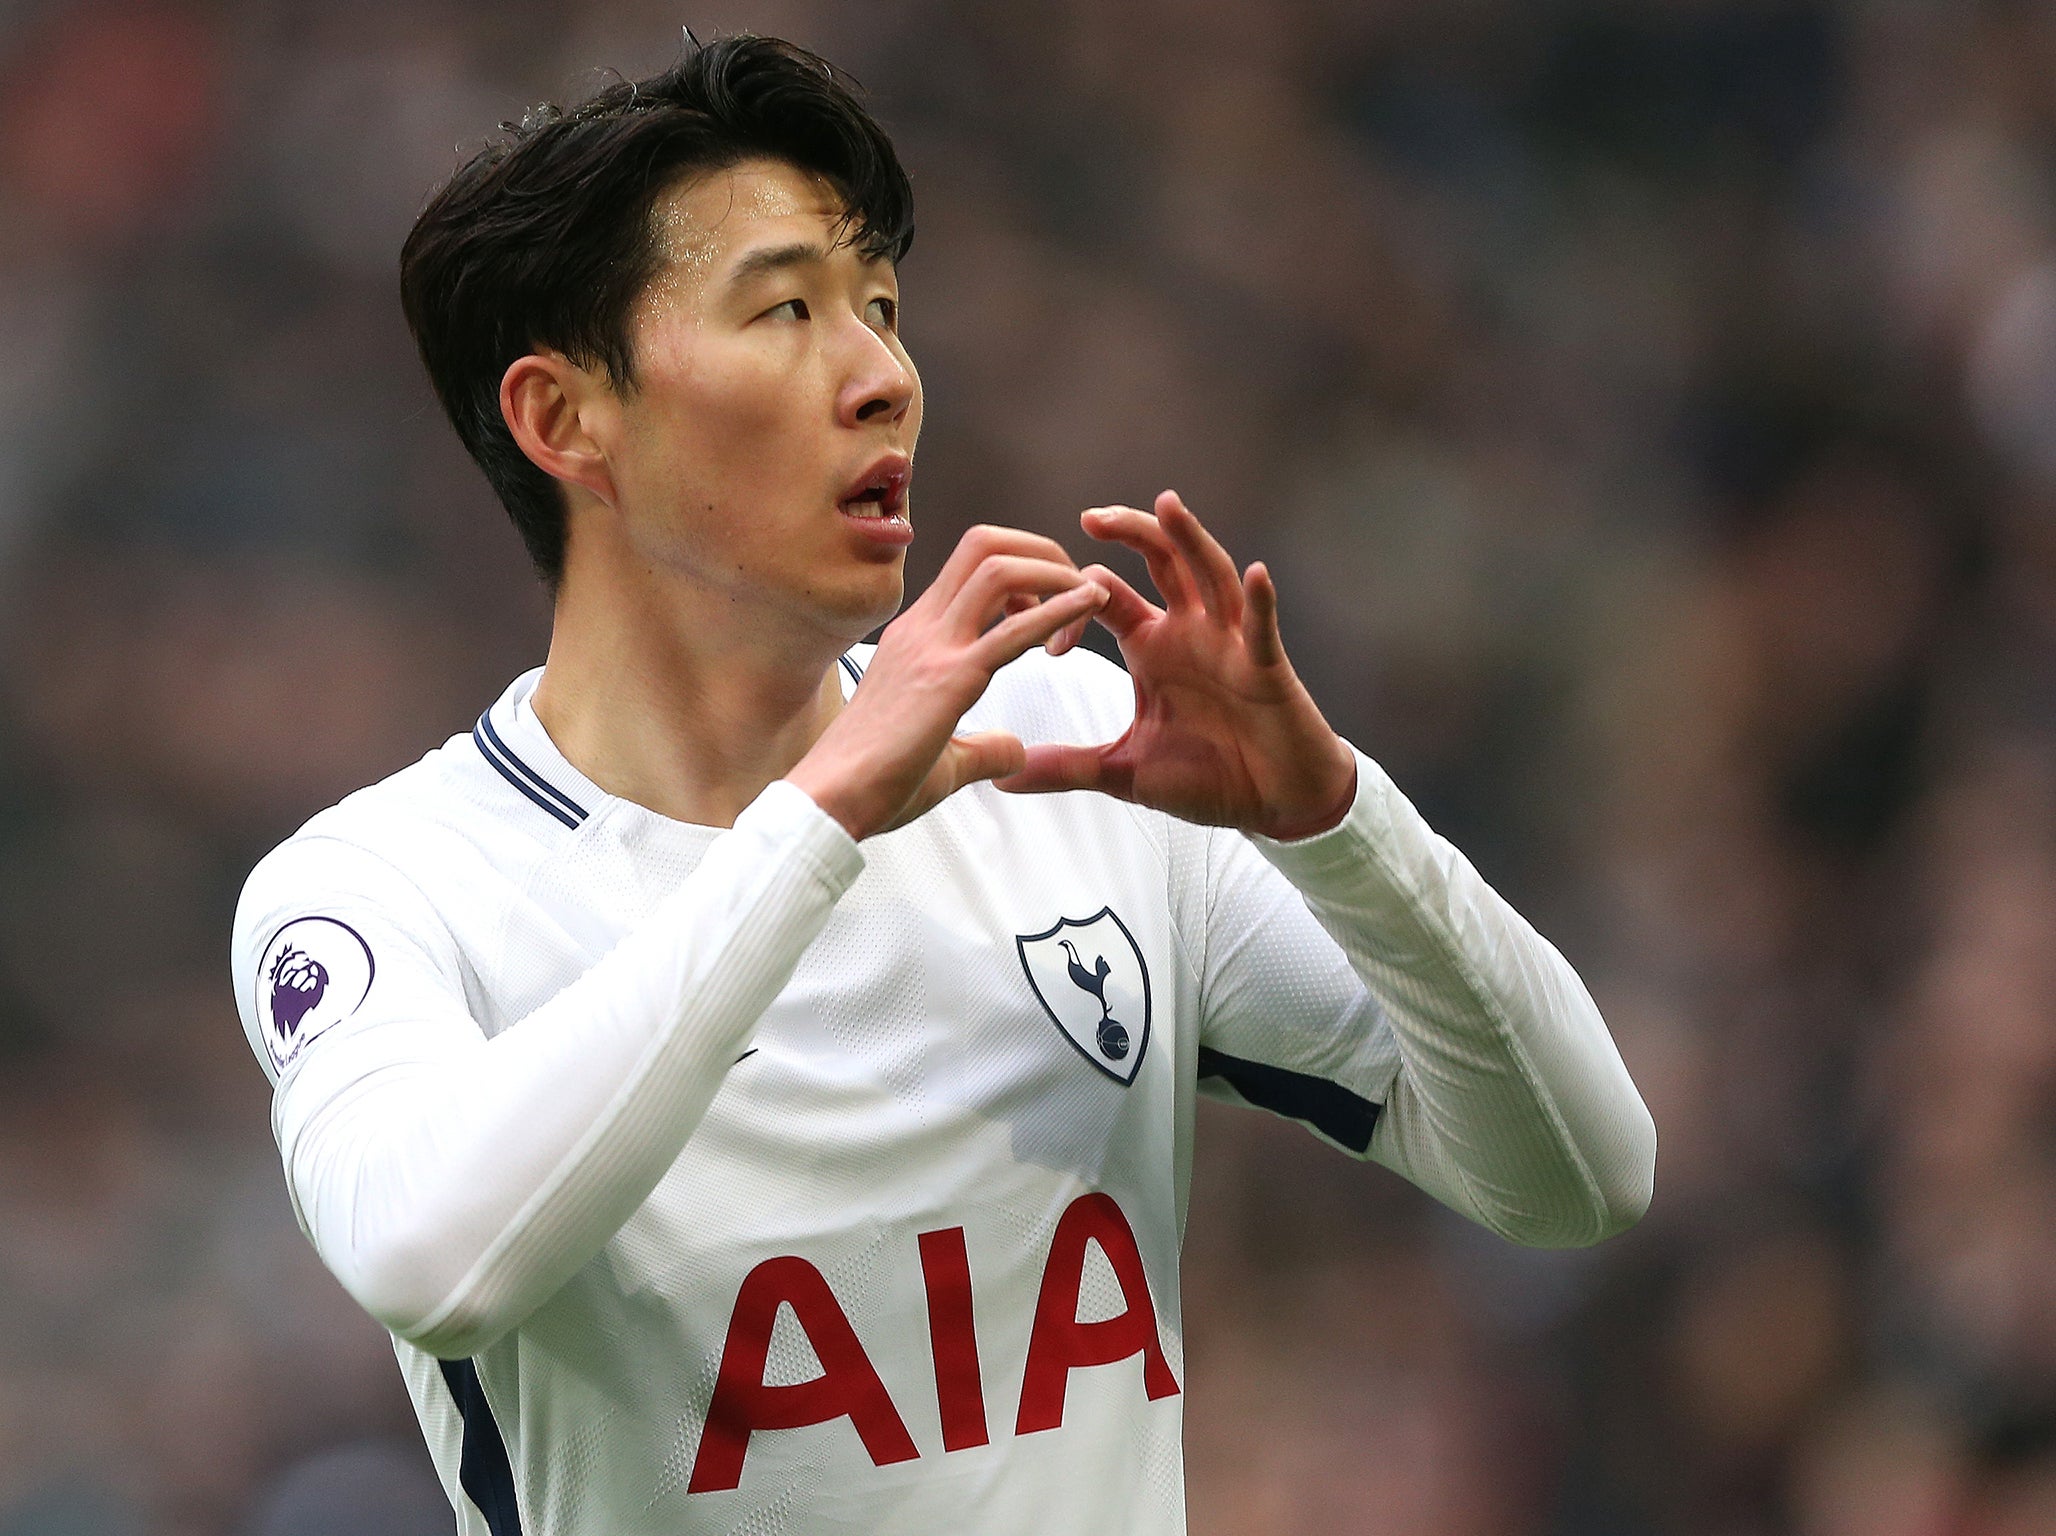 Harry Kane labelled &apos;best player in the world&apos; by Tottenham teammate Son Heung-min